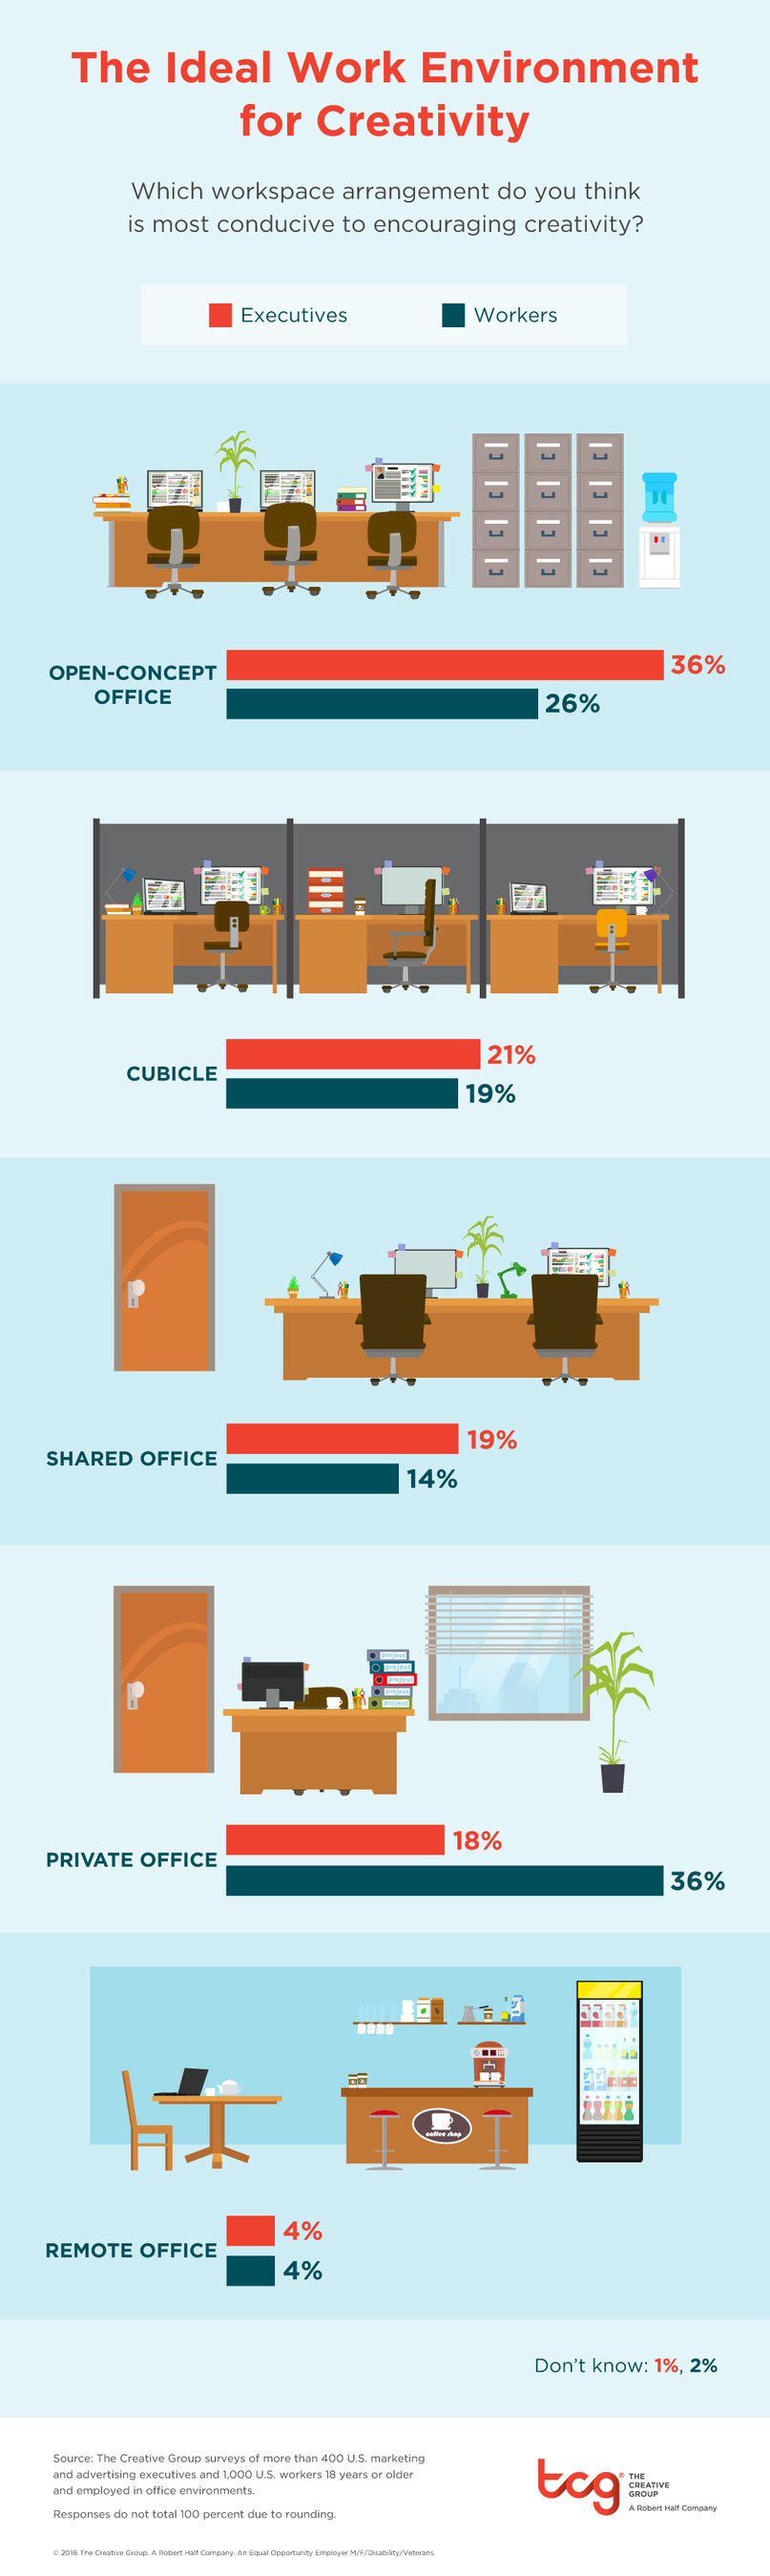 Research from The Creative Group shows executives and workers differ on ideal work environment for creativity (PRNewsFoto/The Creative Group)